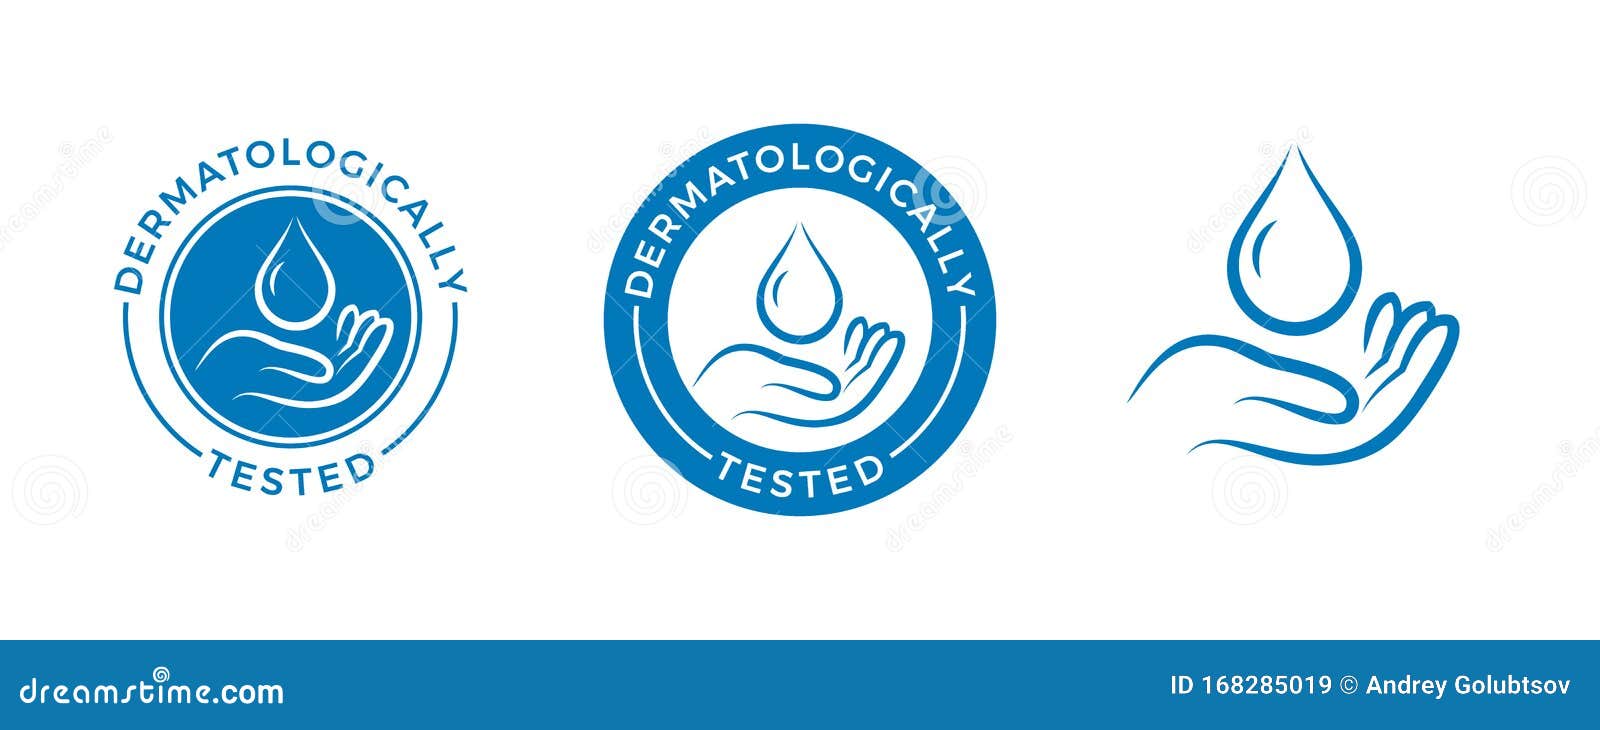 dermatologically tested  label with water drop and hand logo. dermatology test, dermatologist clinically proven icon for